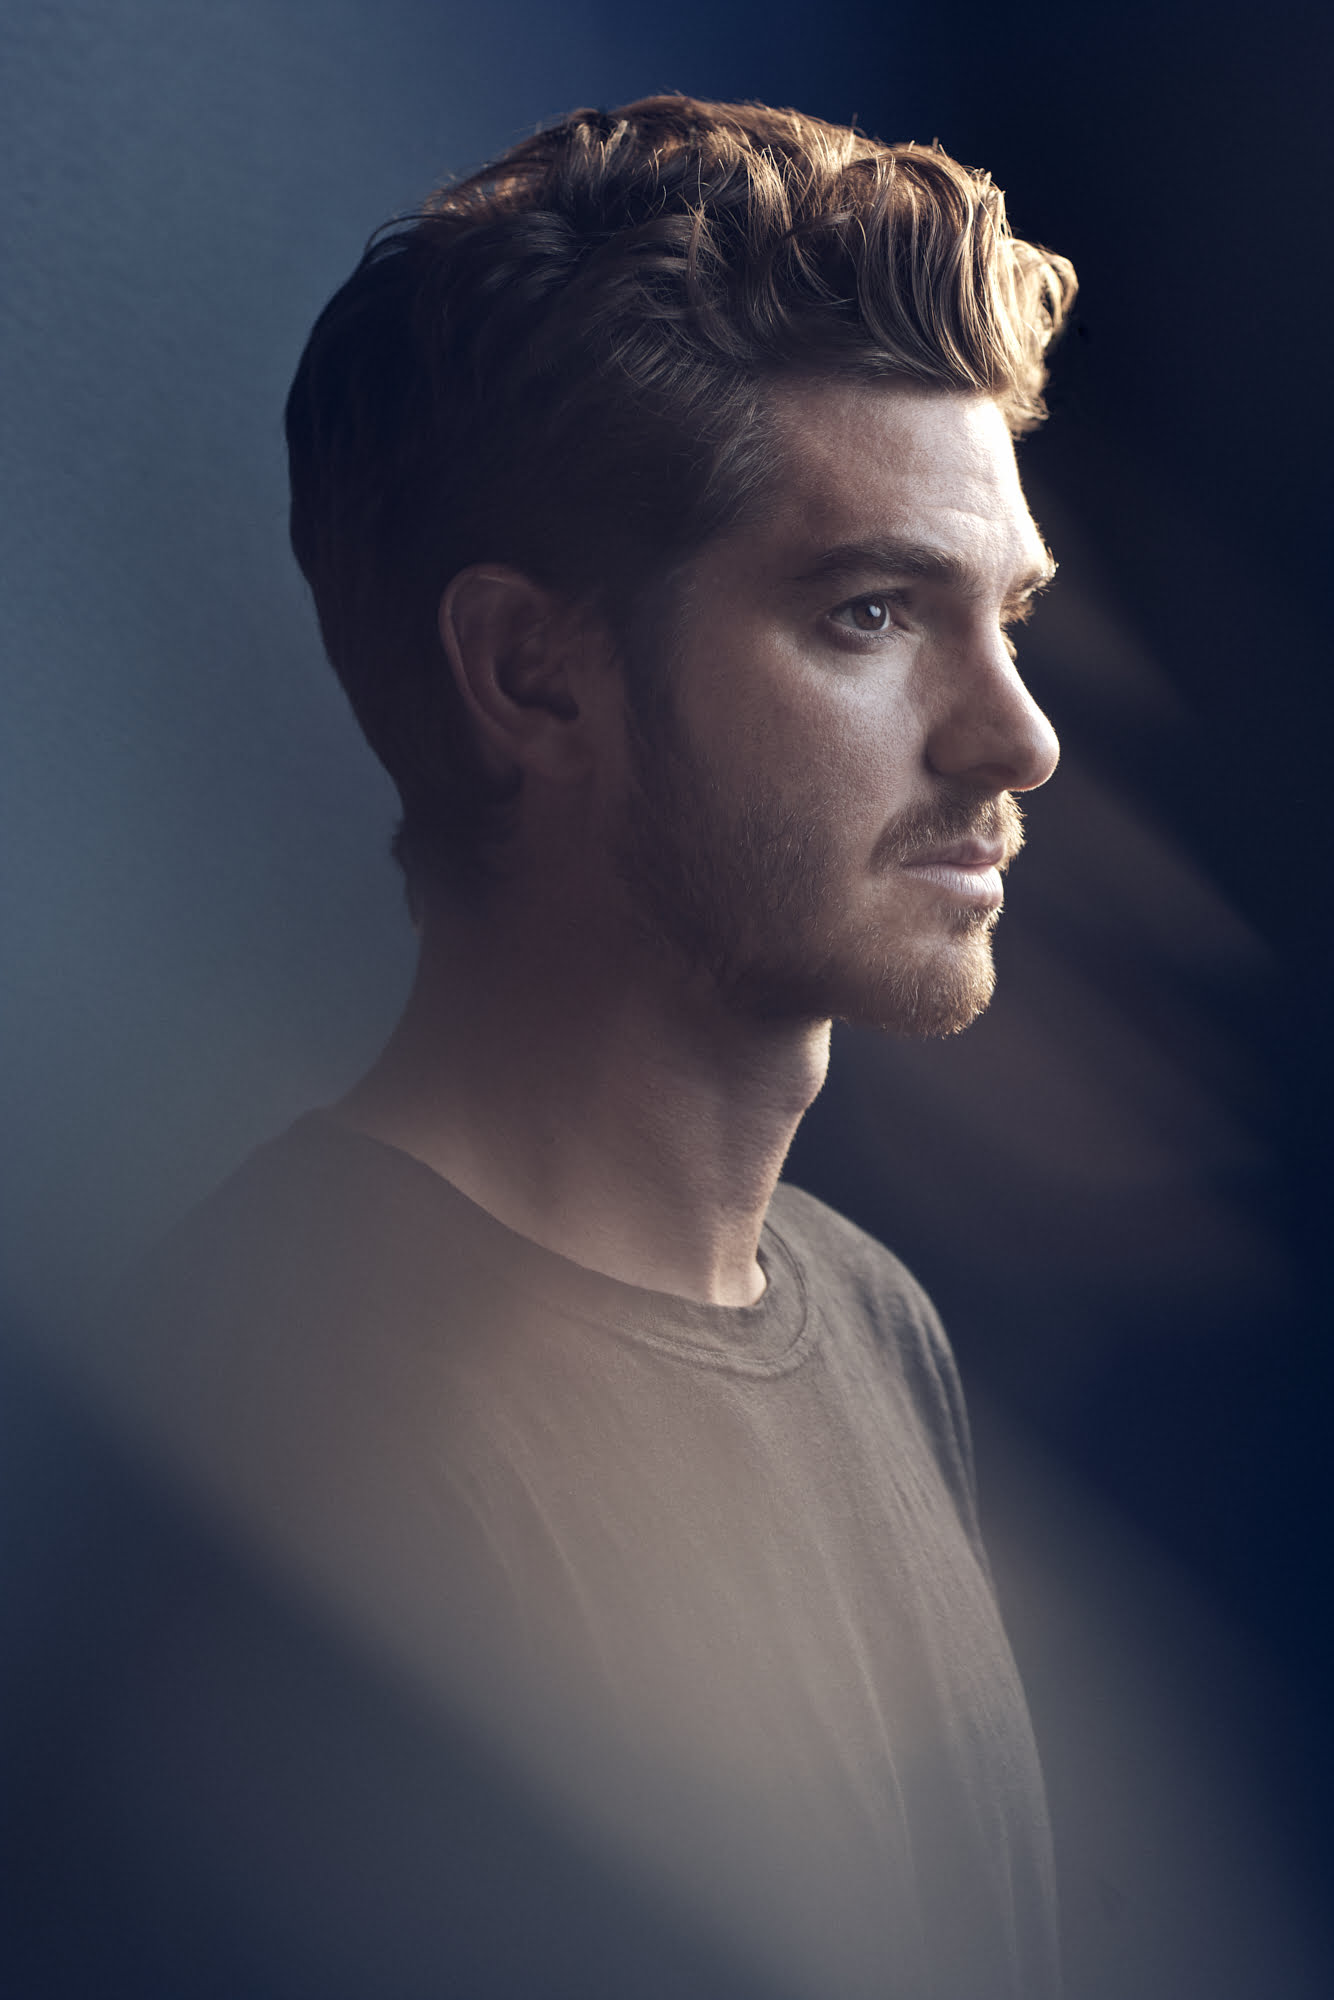 Andrew Garfield shot shot for Audible for the forthcoming release of audio drama 1984